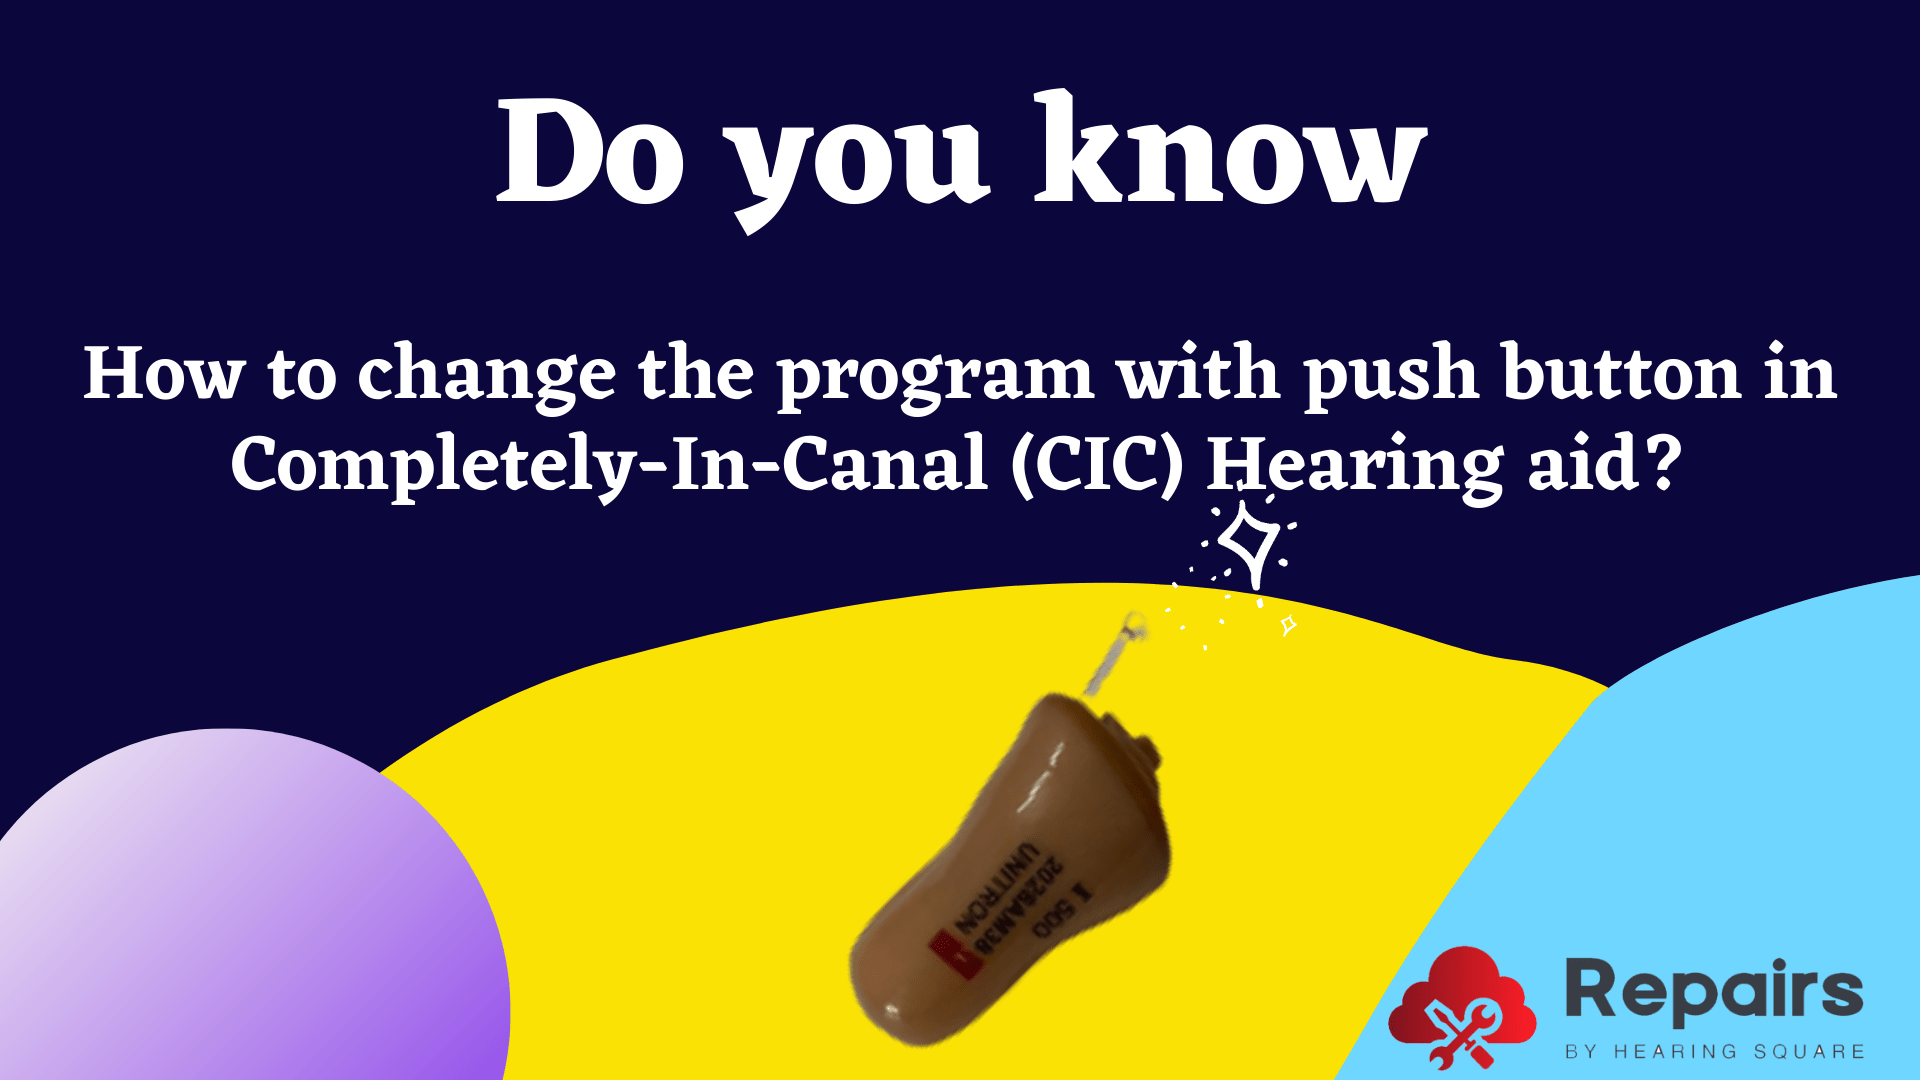 How to change the program with push button in Completely-In-Canal (CIC) Hearing aid